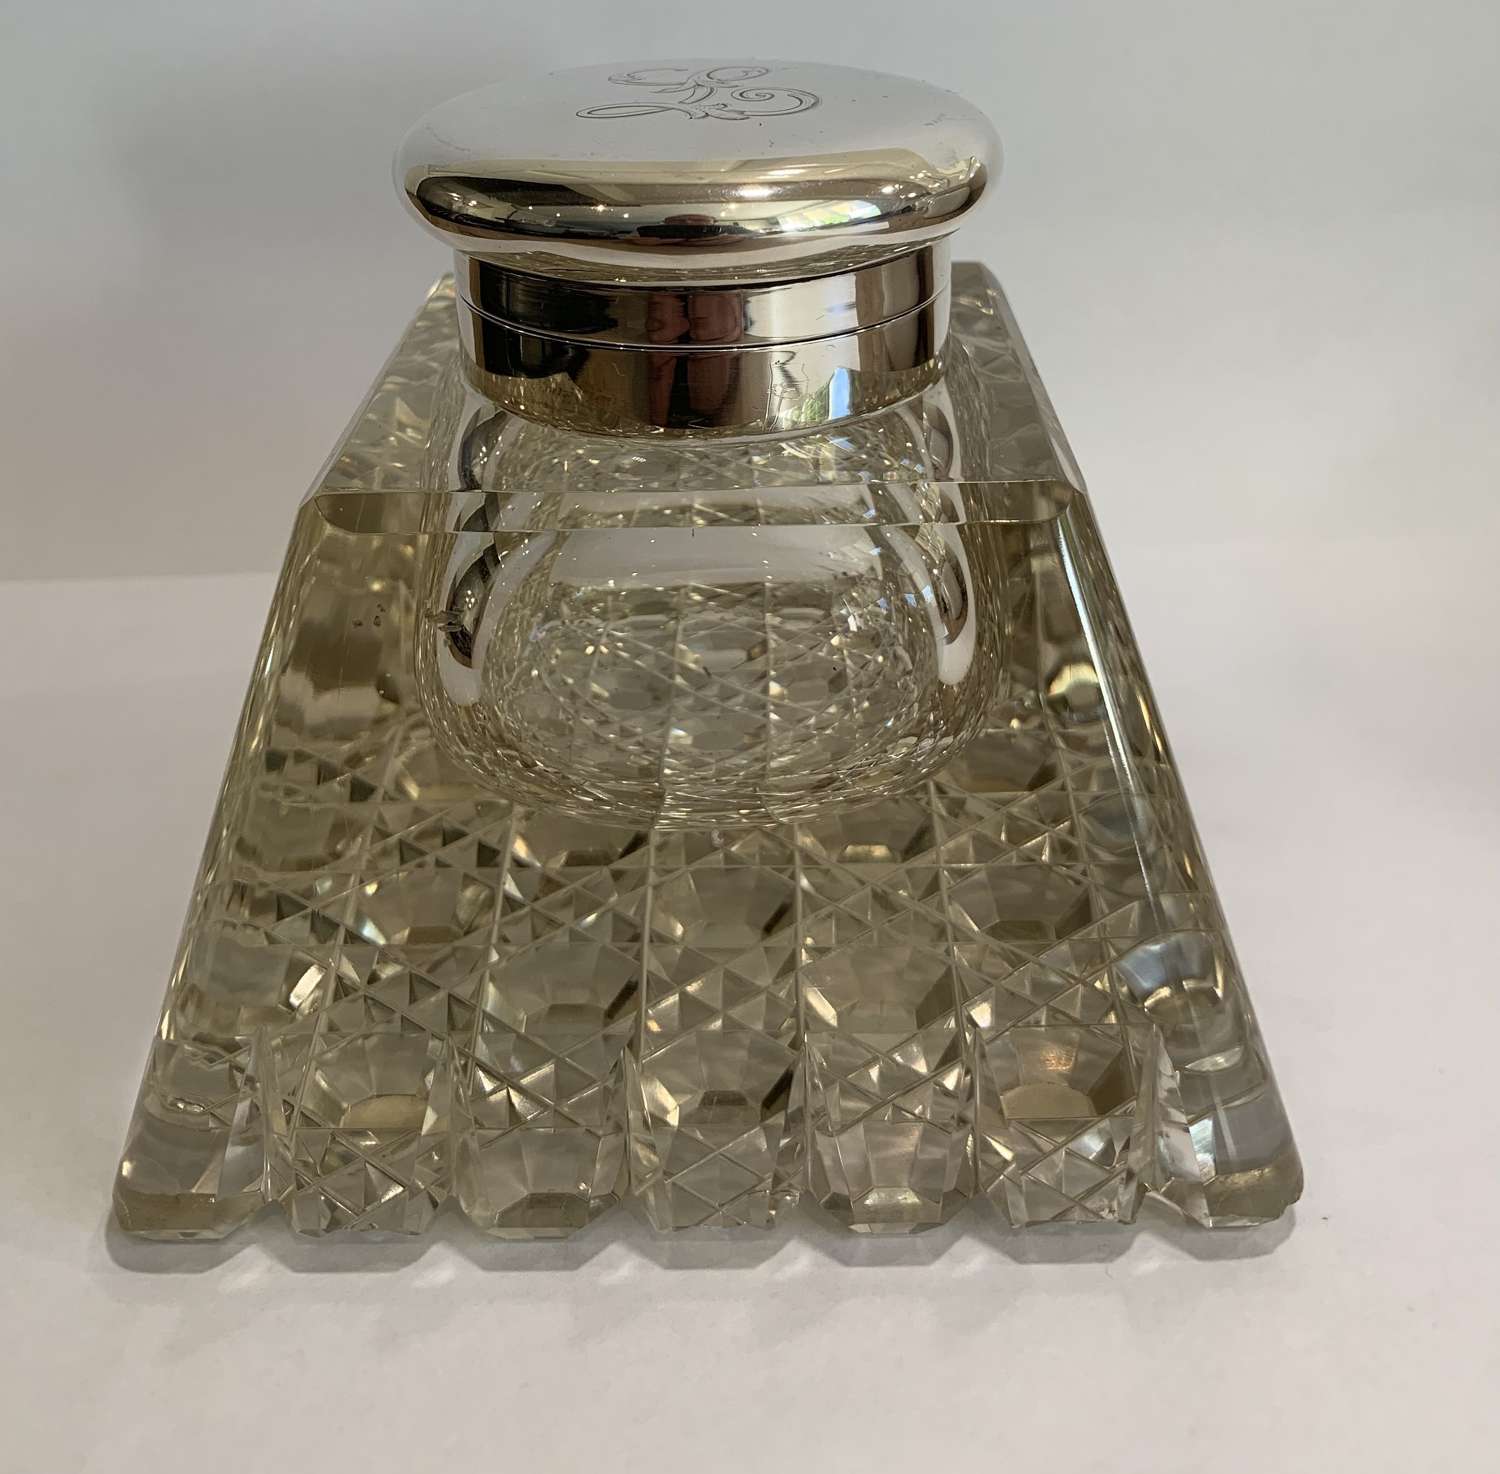 A pyramid style silver inkwell with hobnail cut glass